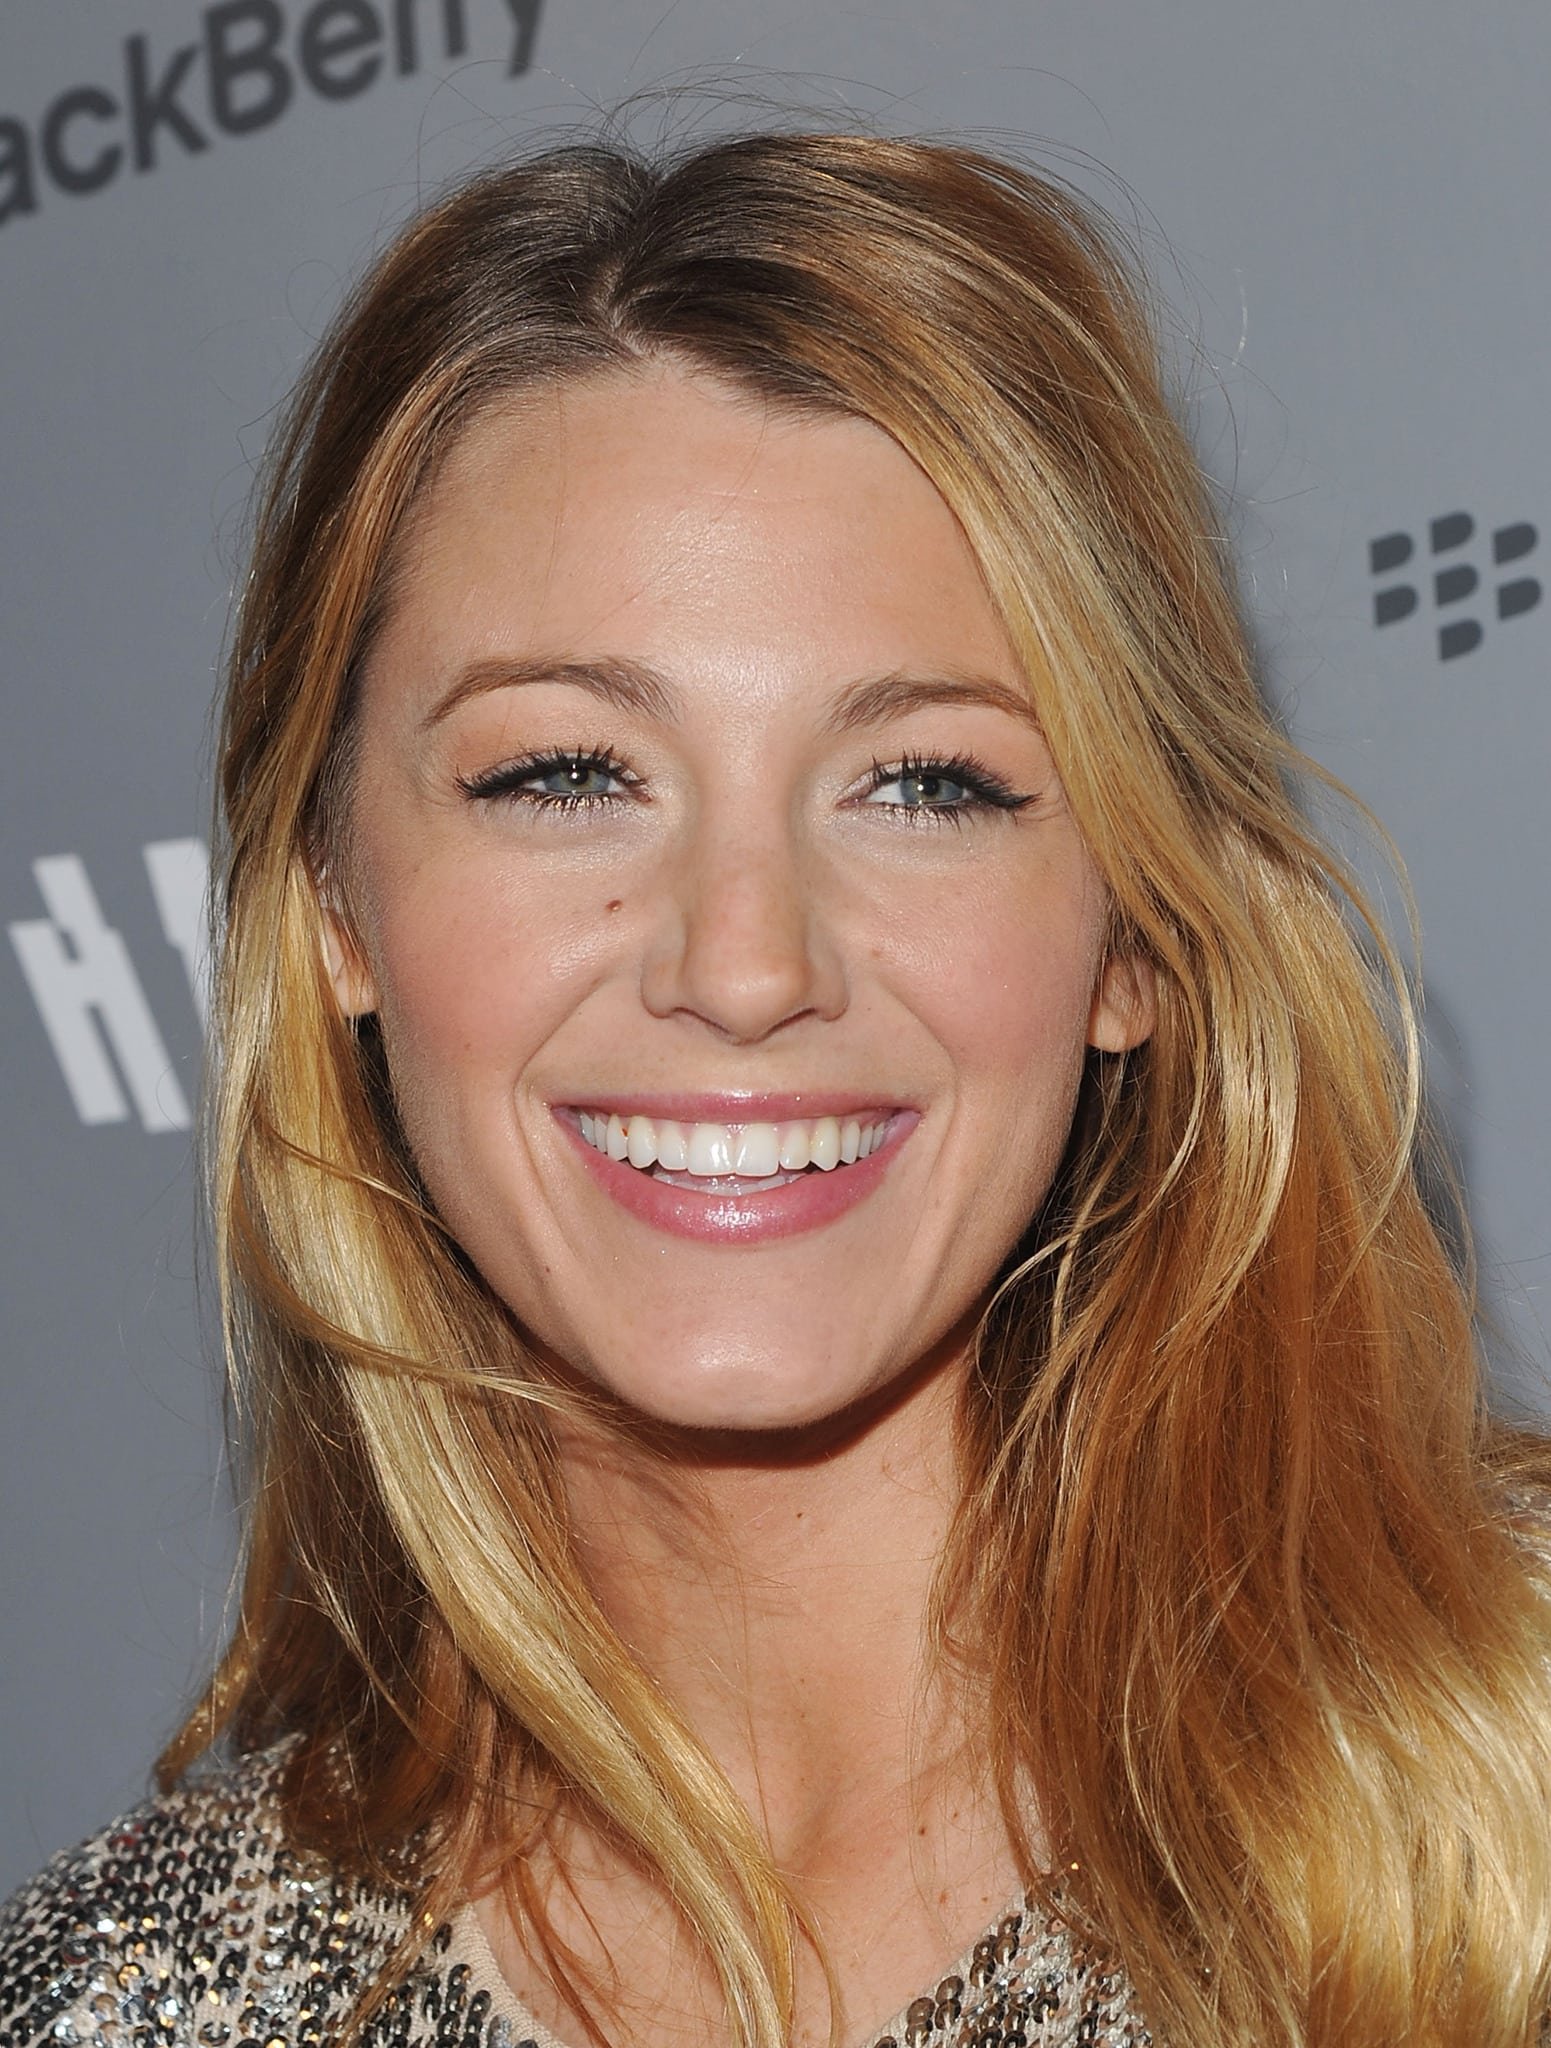 Why is Blake Lively so popular?